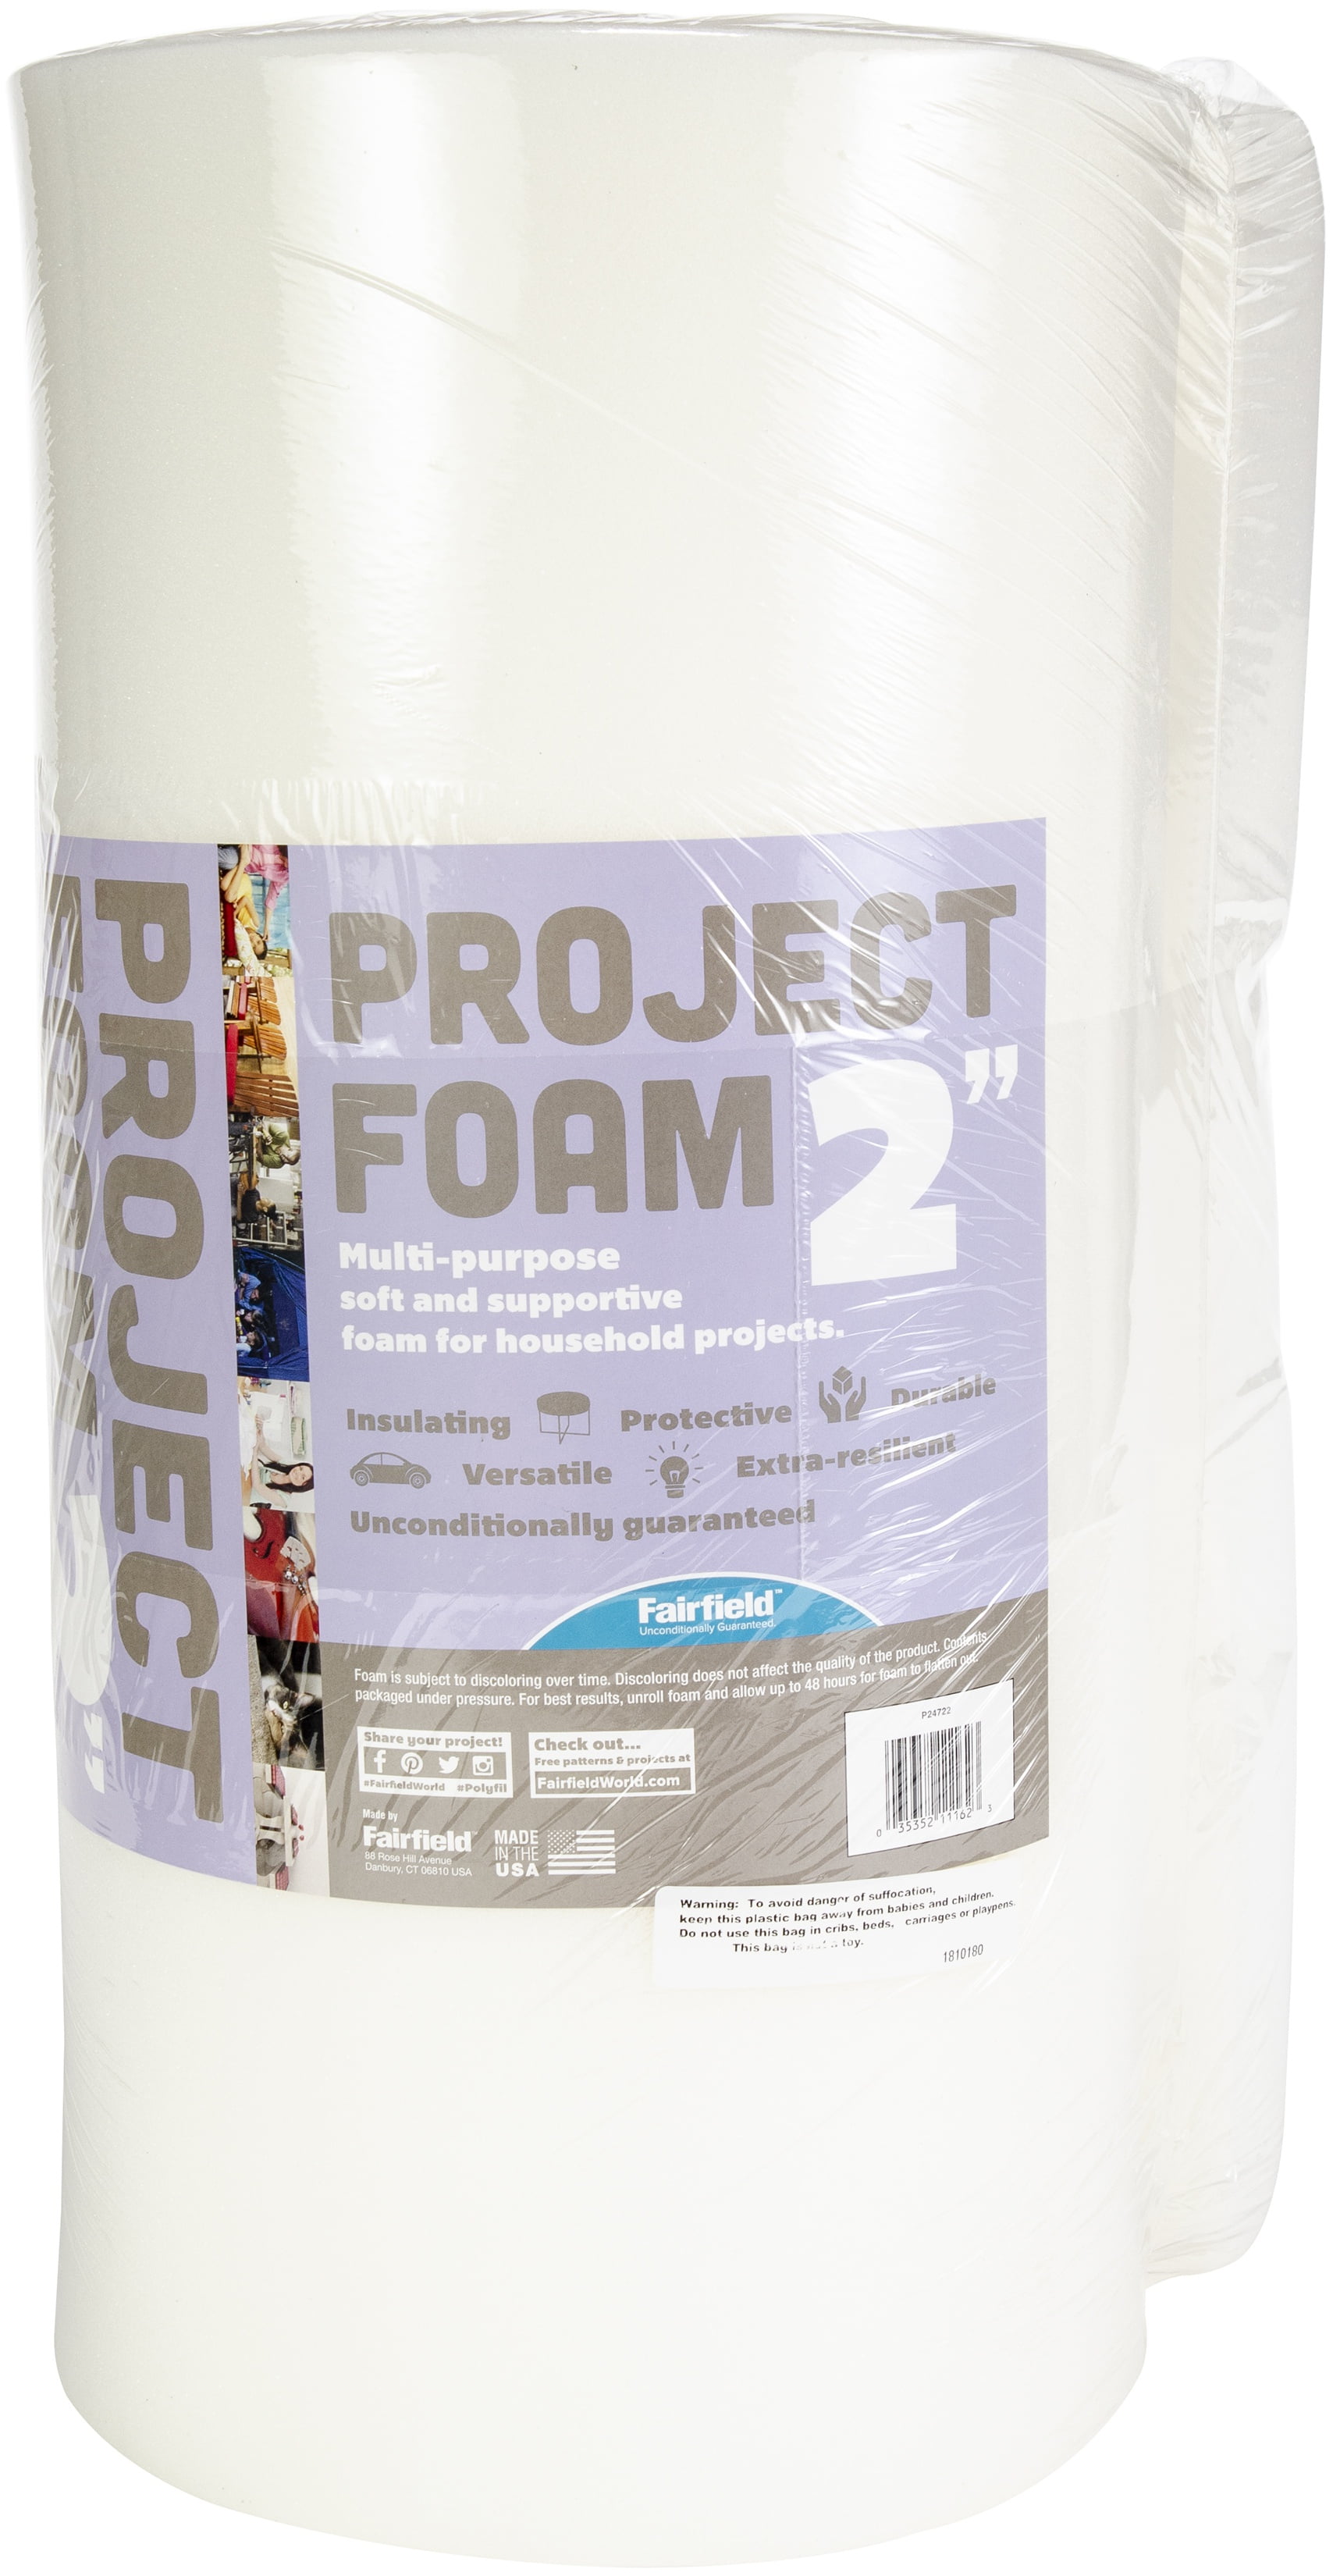 White thick x 5 in Jaybird & Mais 30/31 Adhesive Foam: 1/4 in x 6 ft. 